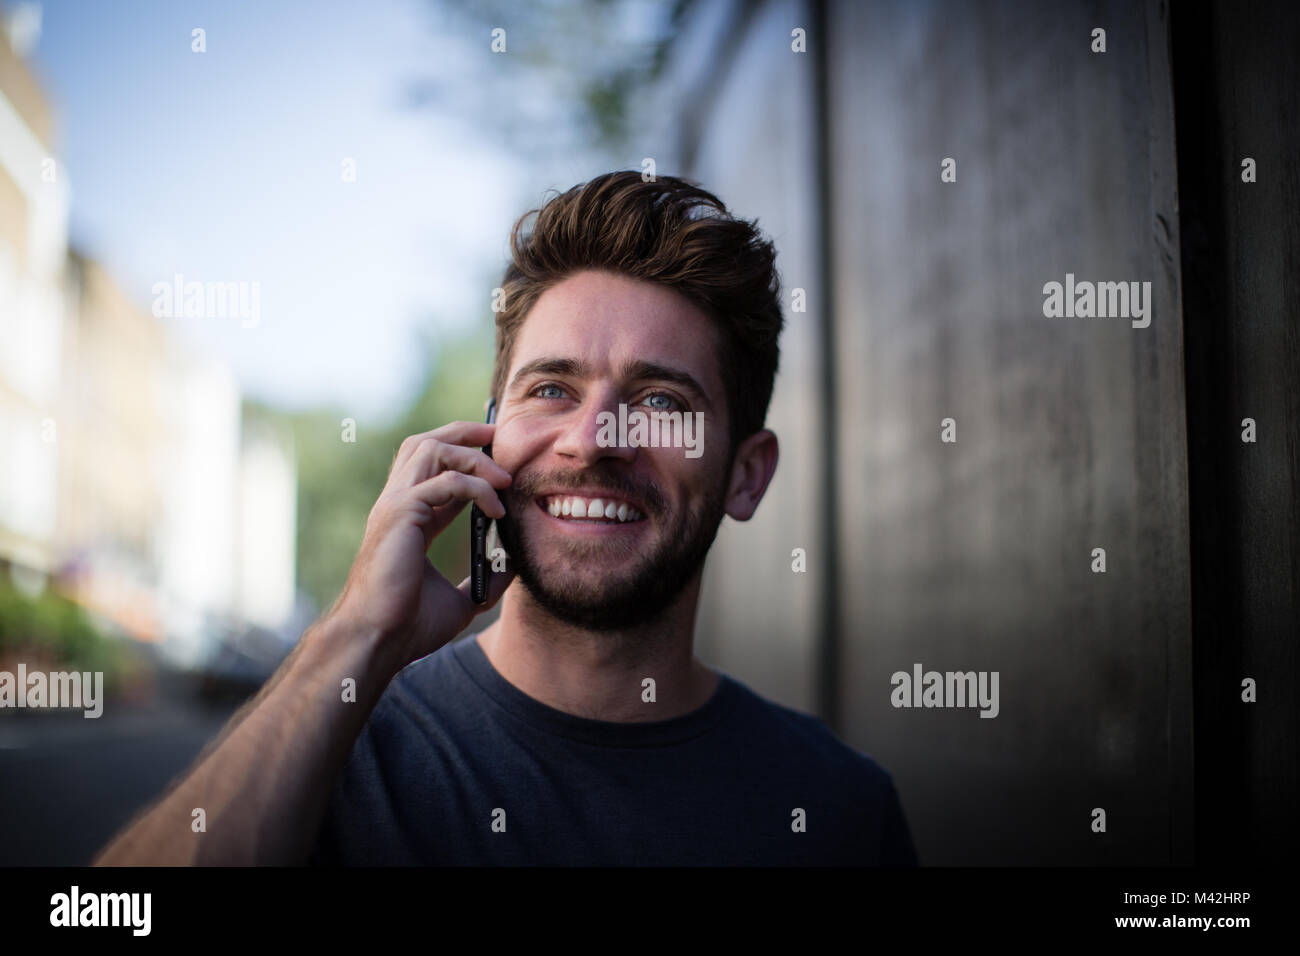 Young adult walking down street on phone Stock Photo